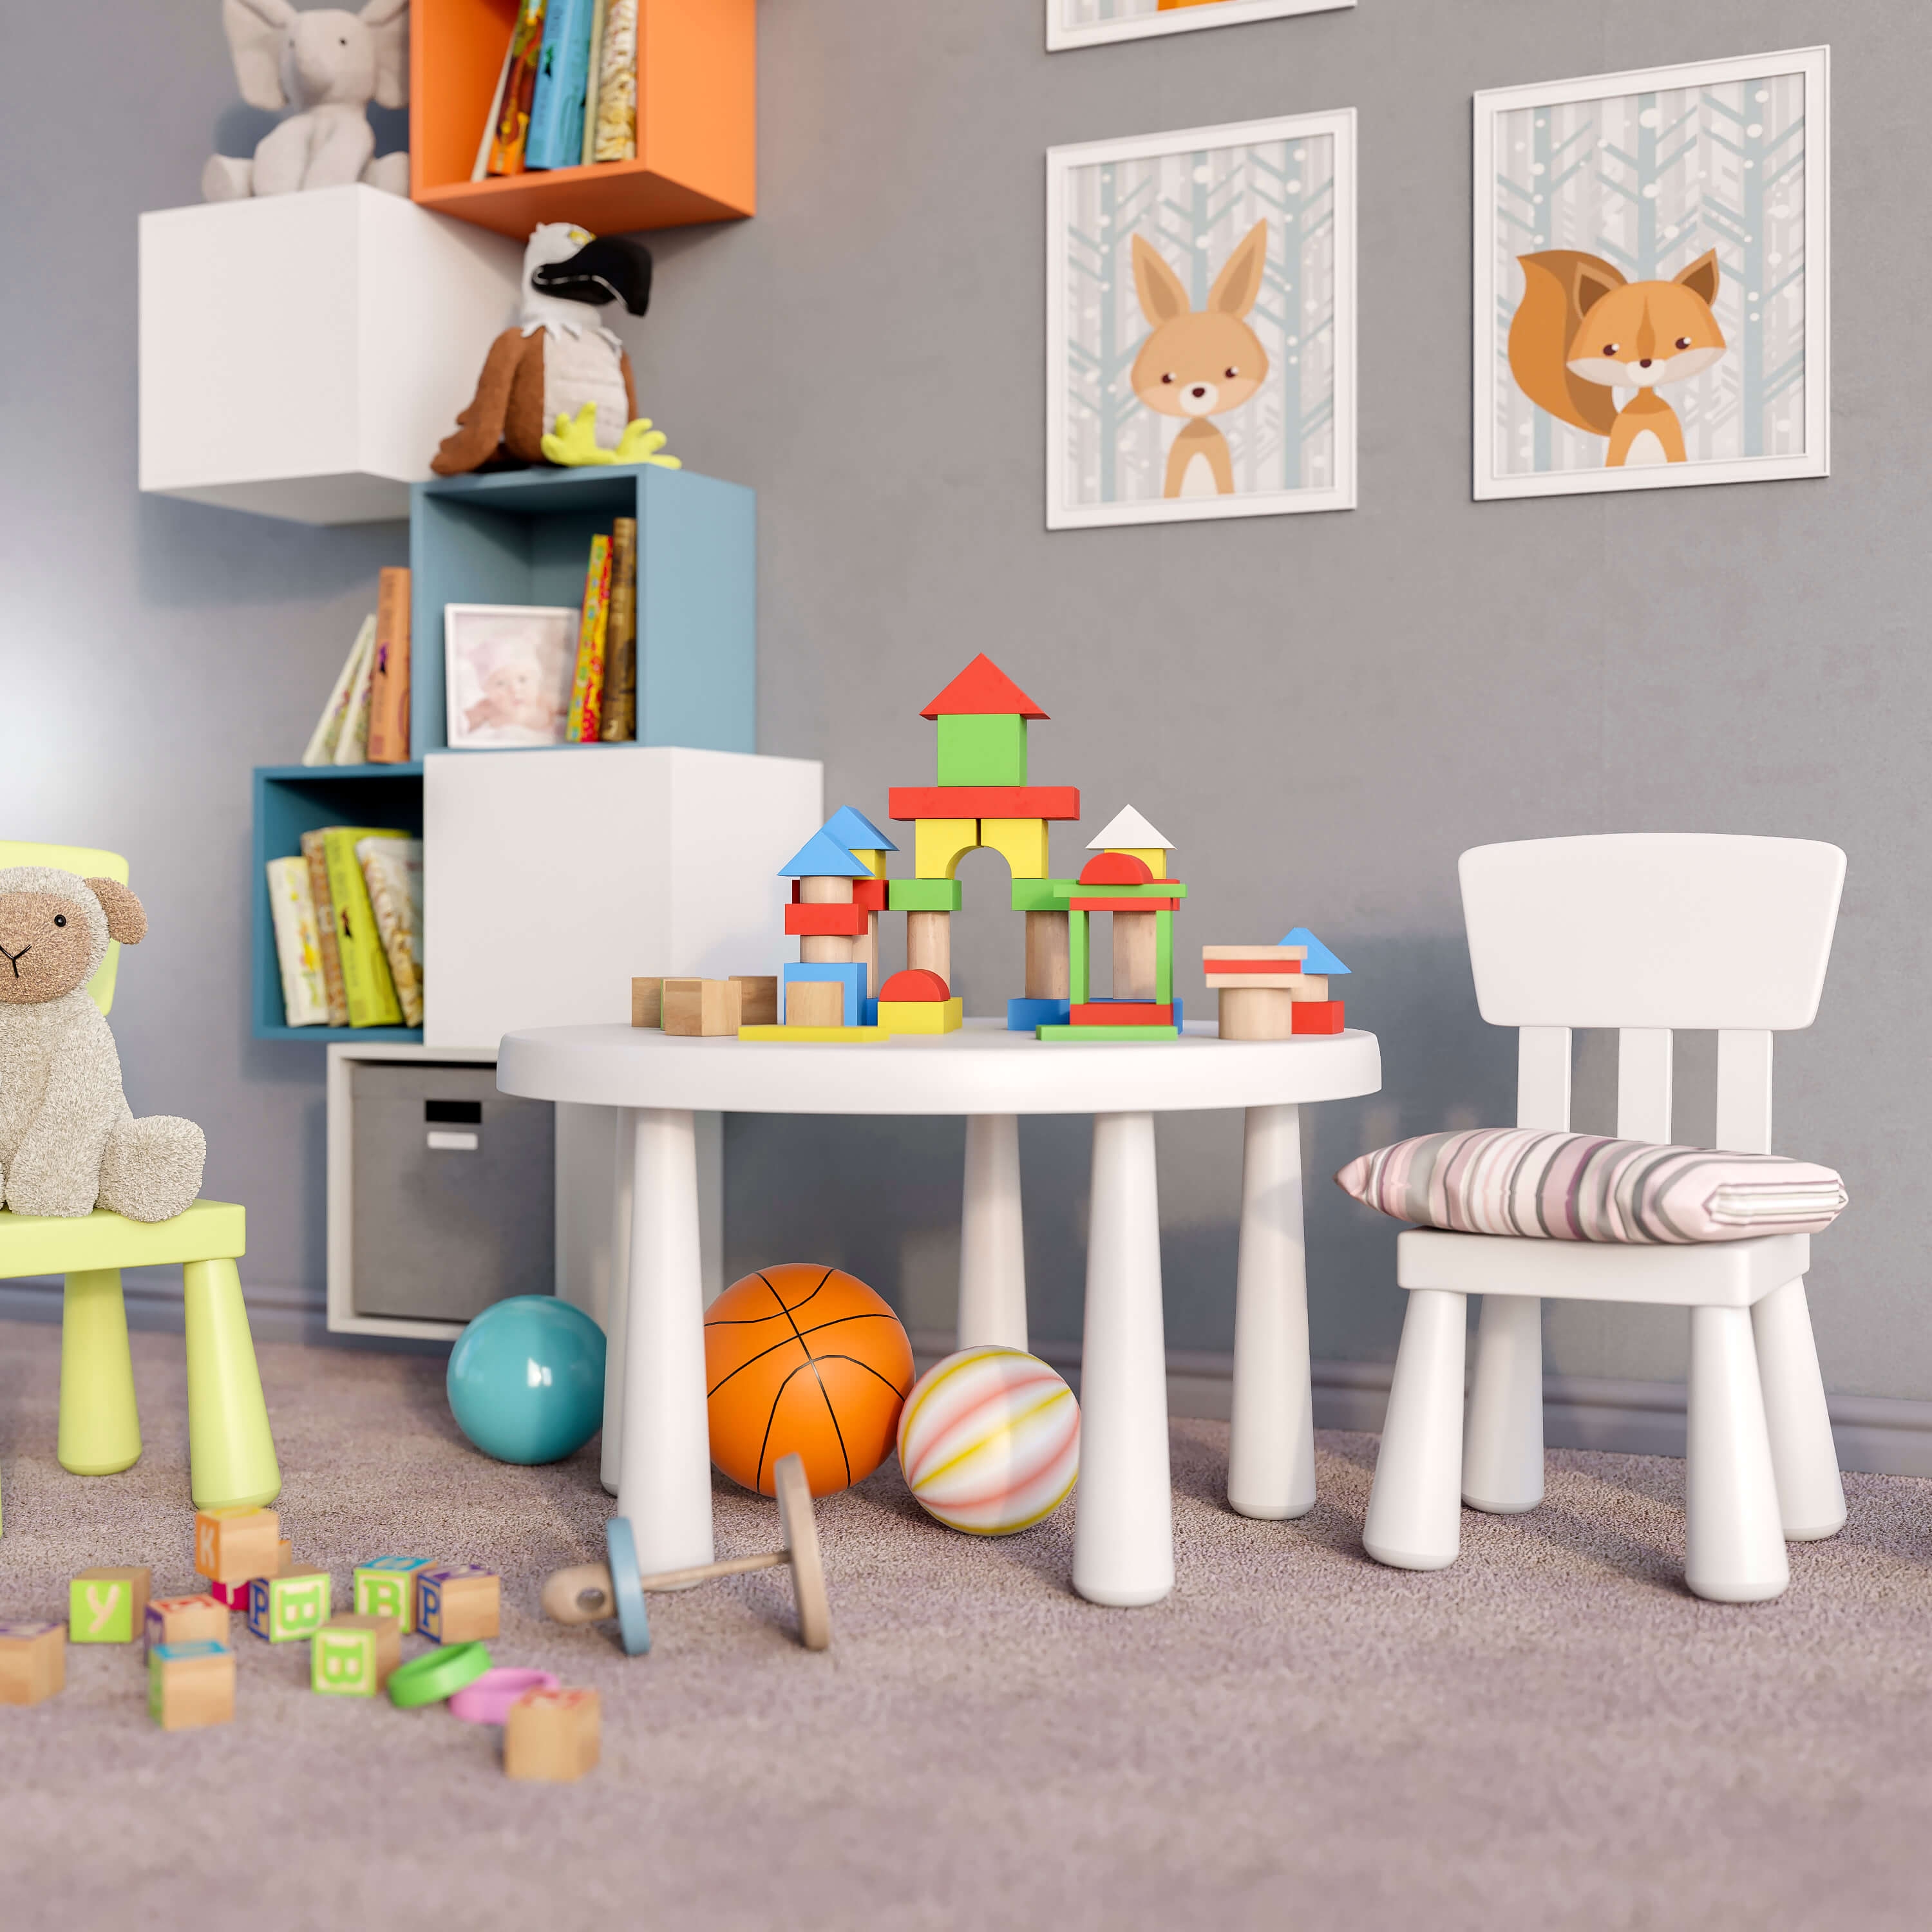 Other decorative objects / Full furniture set / Toys 2